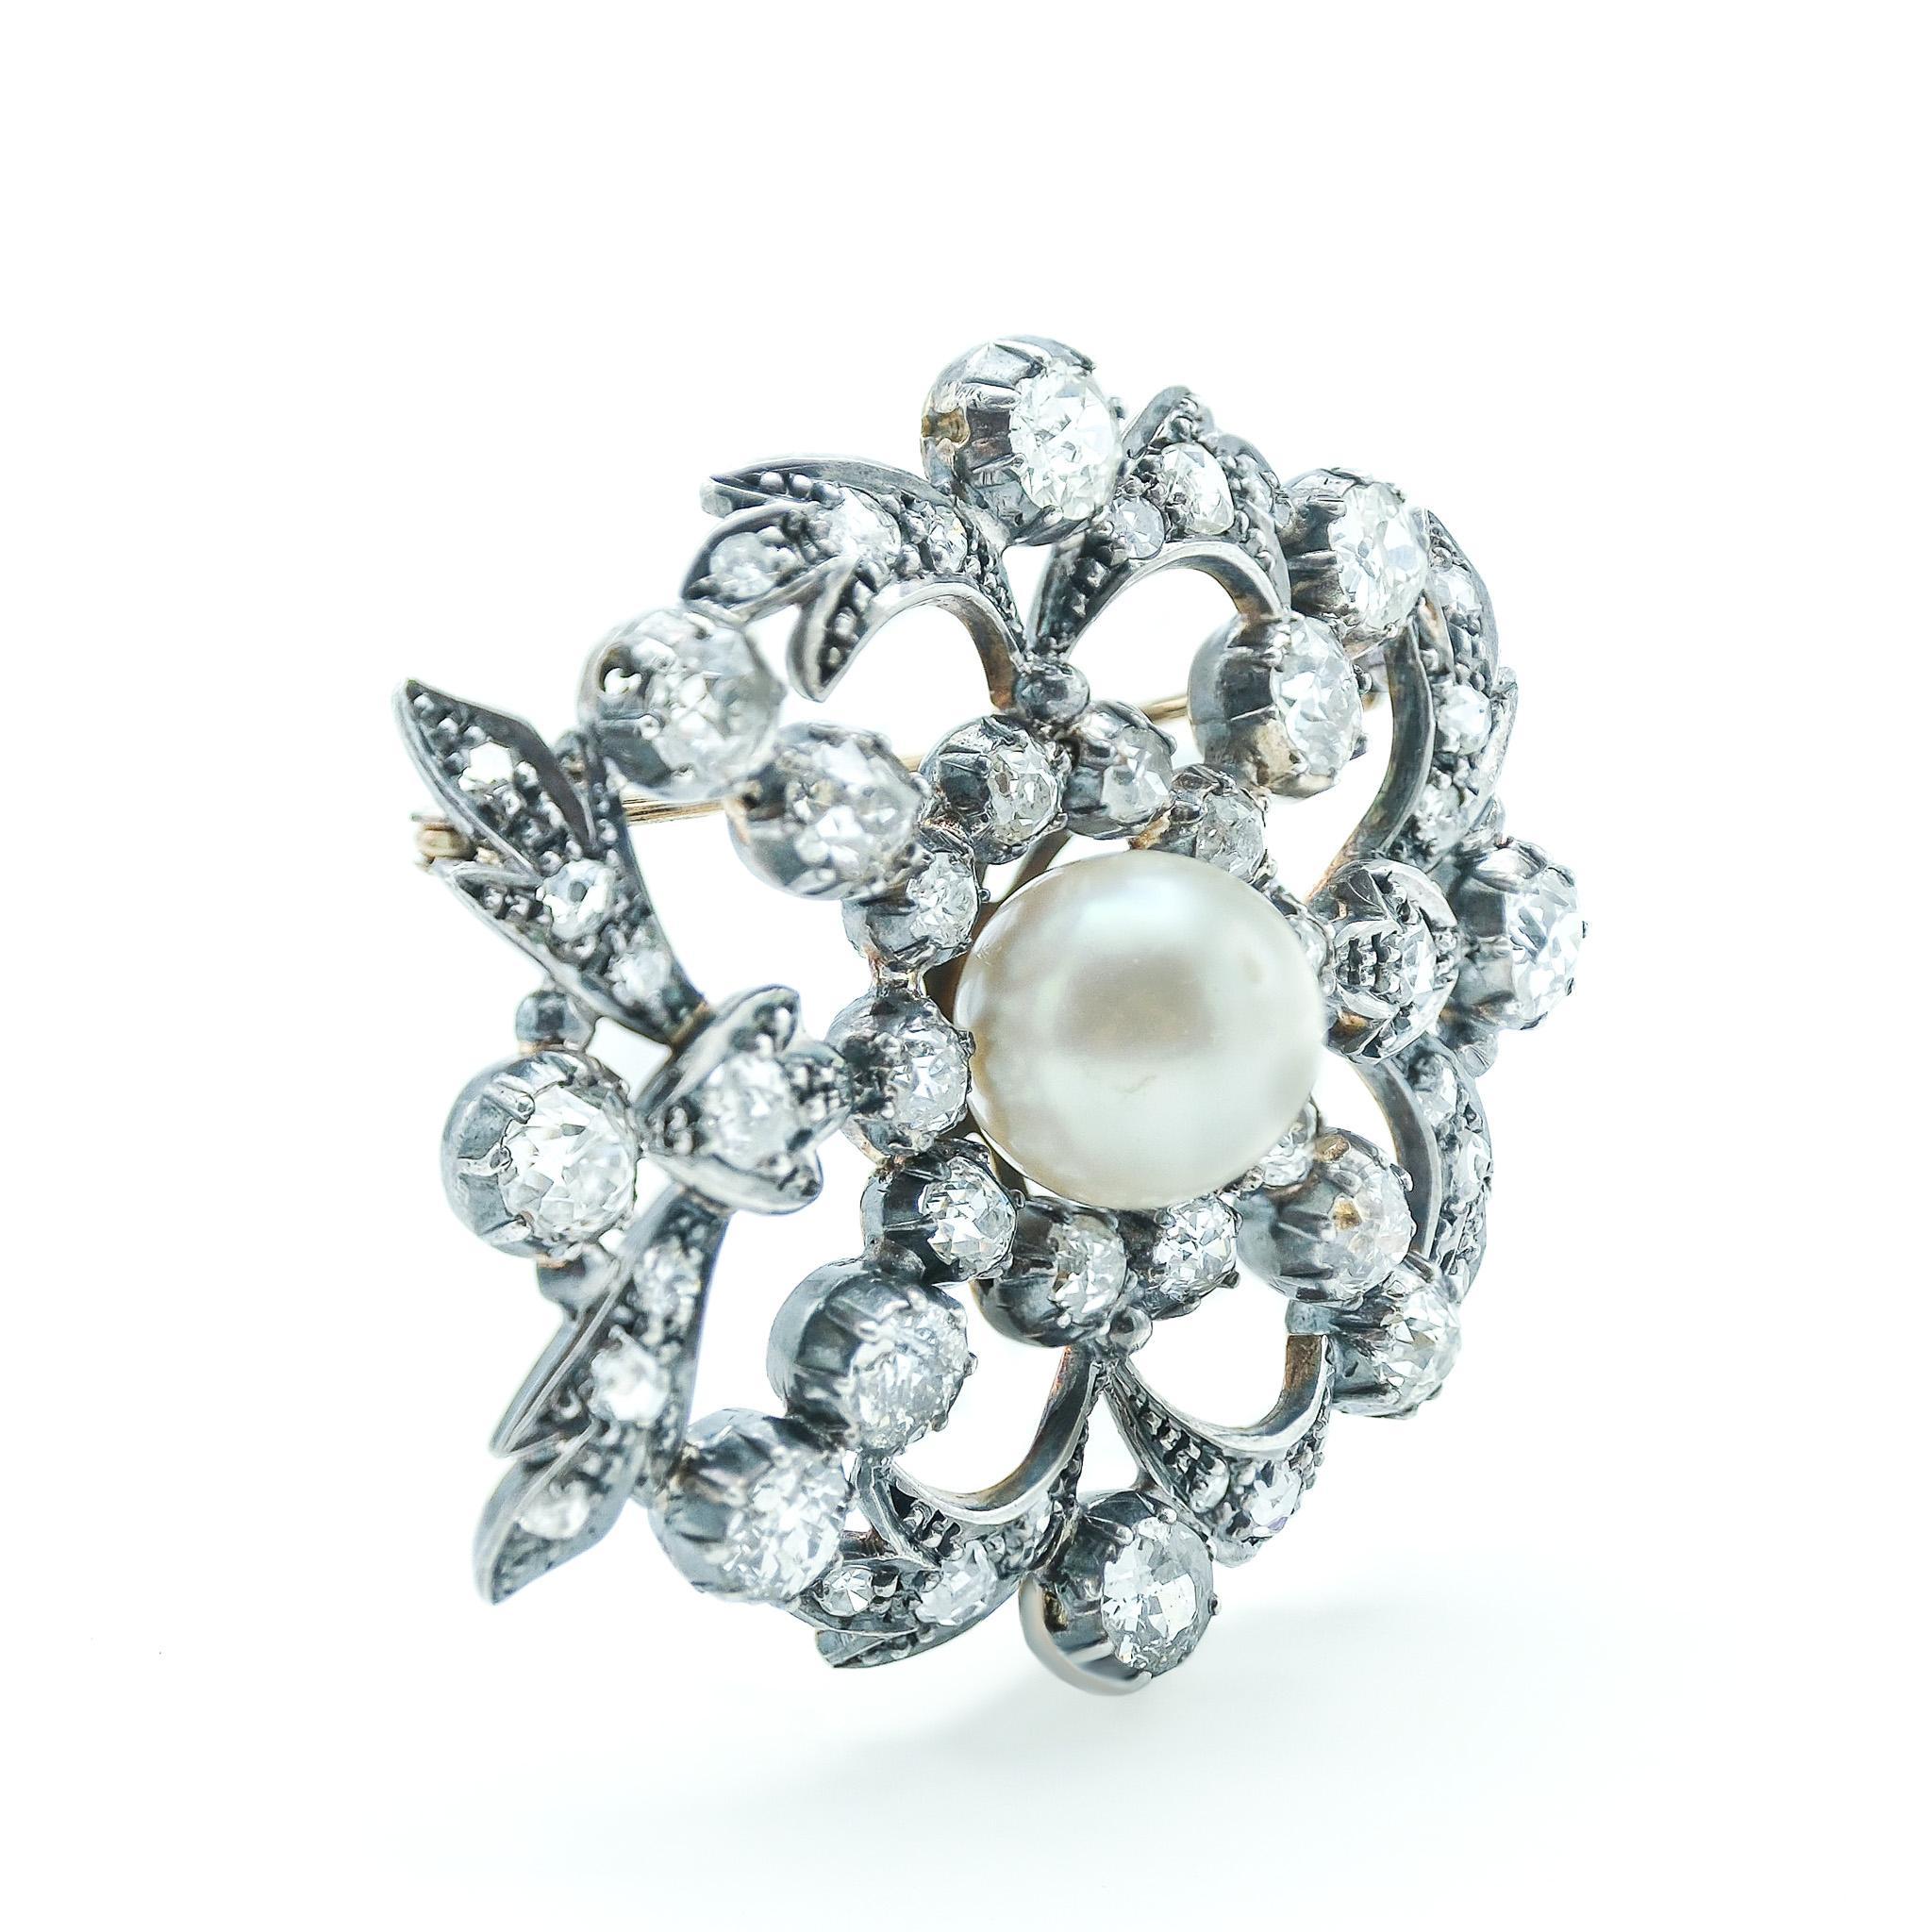 Edwardian 10 Karat White Gold, Silver Topped Diamond and Pearl Brooch In Good Condition For Sale In Fairfield, CT